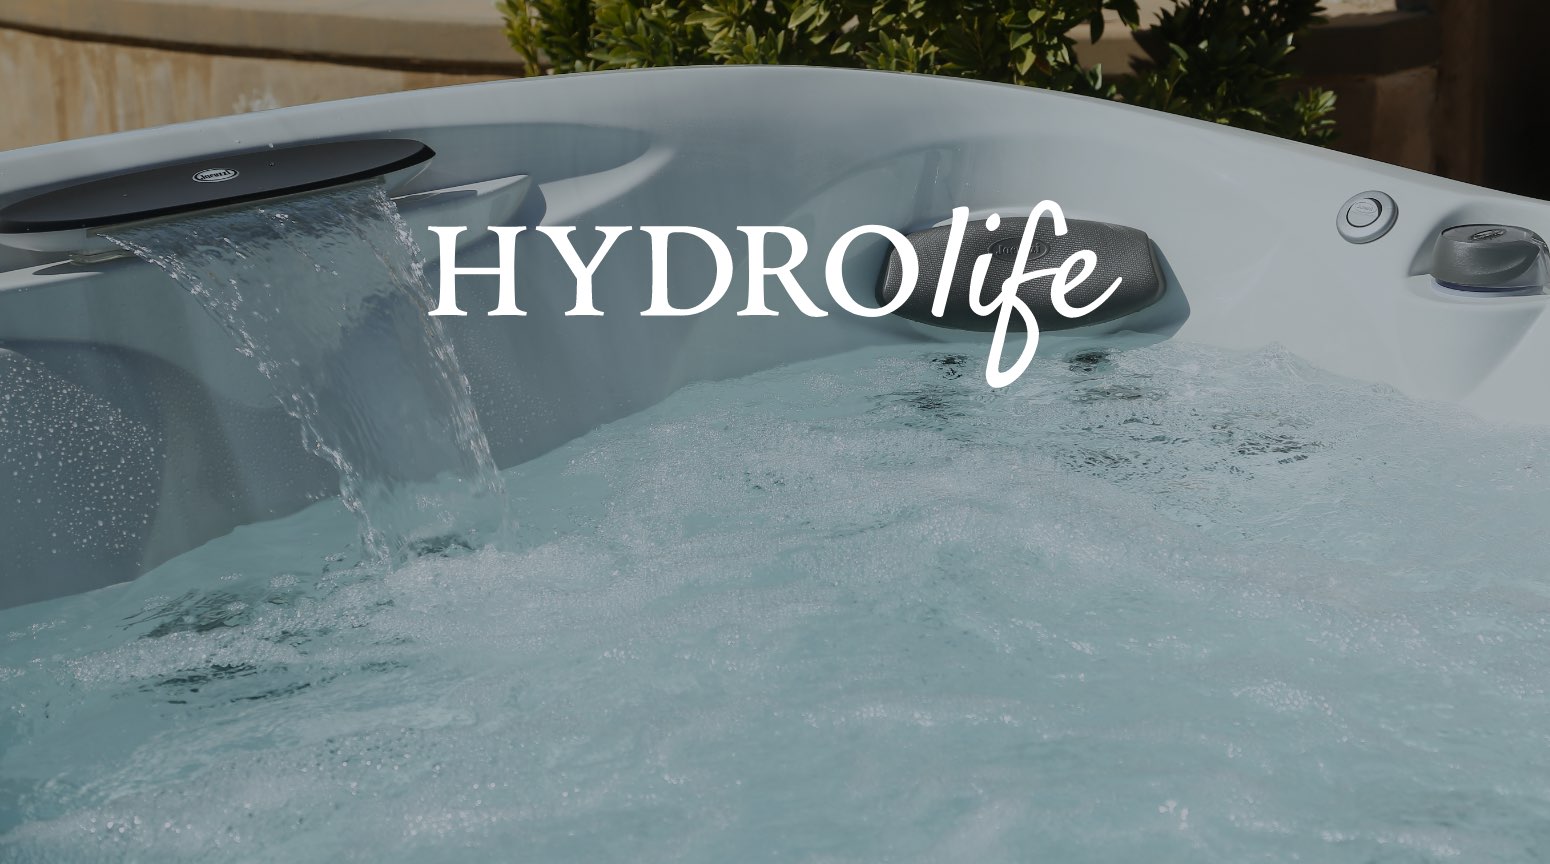 We are proud to be the largest Jacuzzi® retailer in the UK